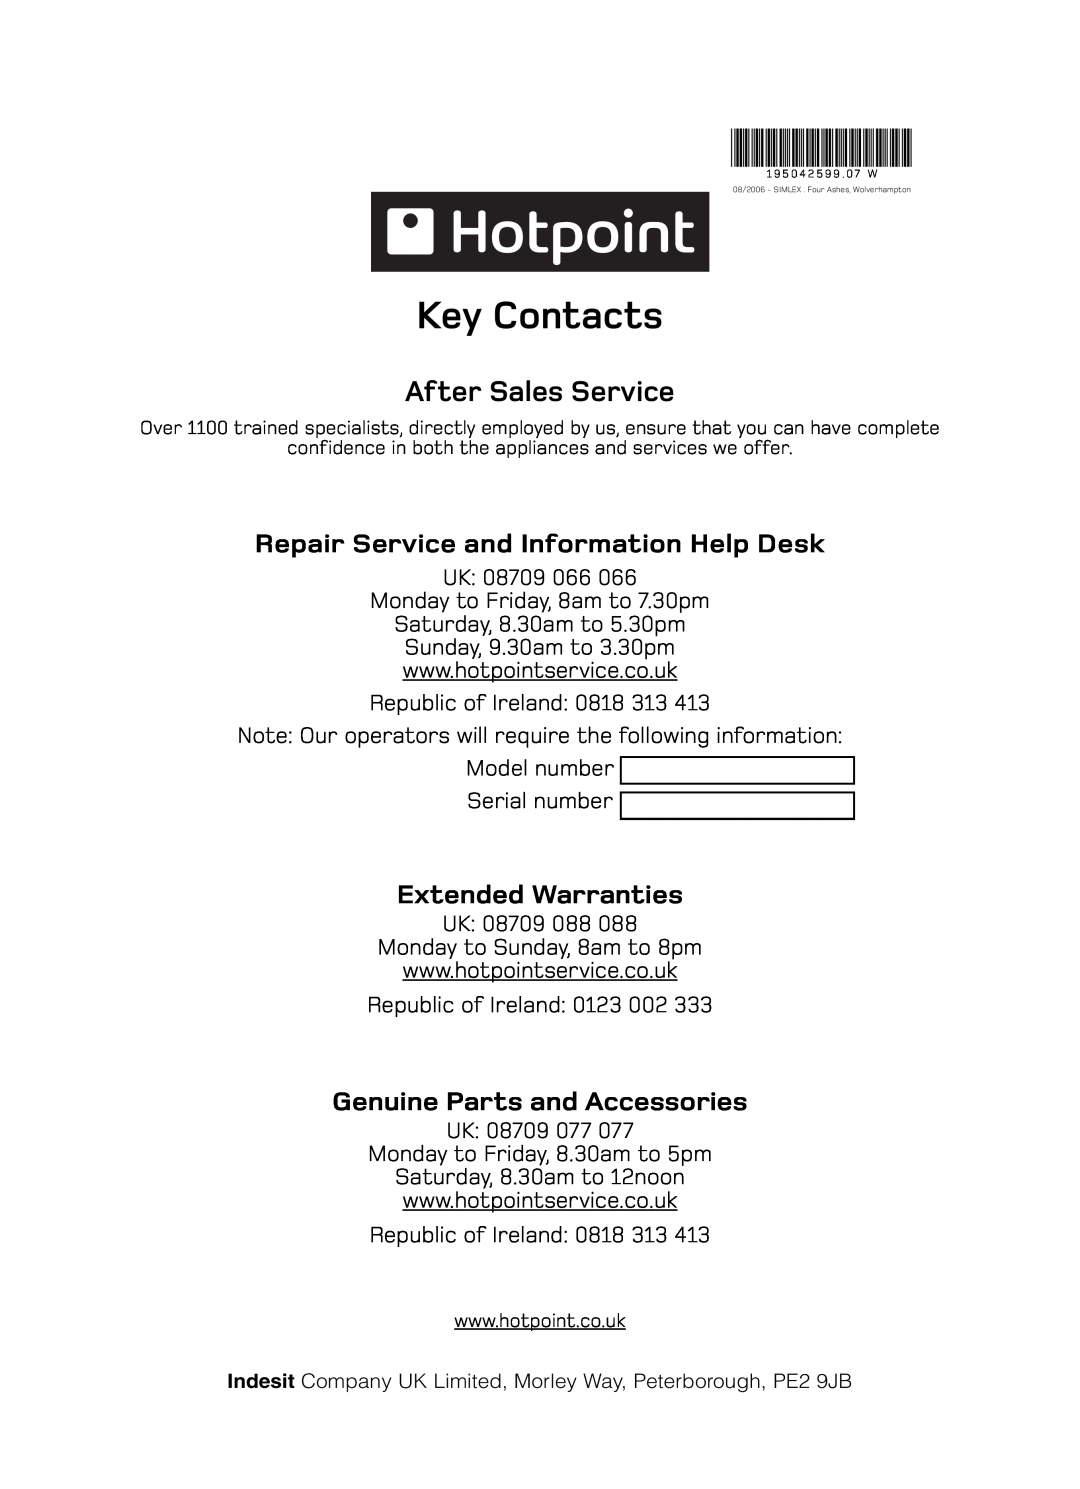 Hotpoint VTD60, VTD65 After Sales Service, Key Contacts, Repair Service and Information Help Desk, Extended Warranties 